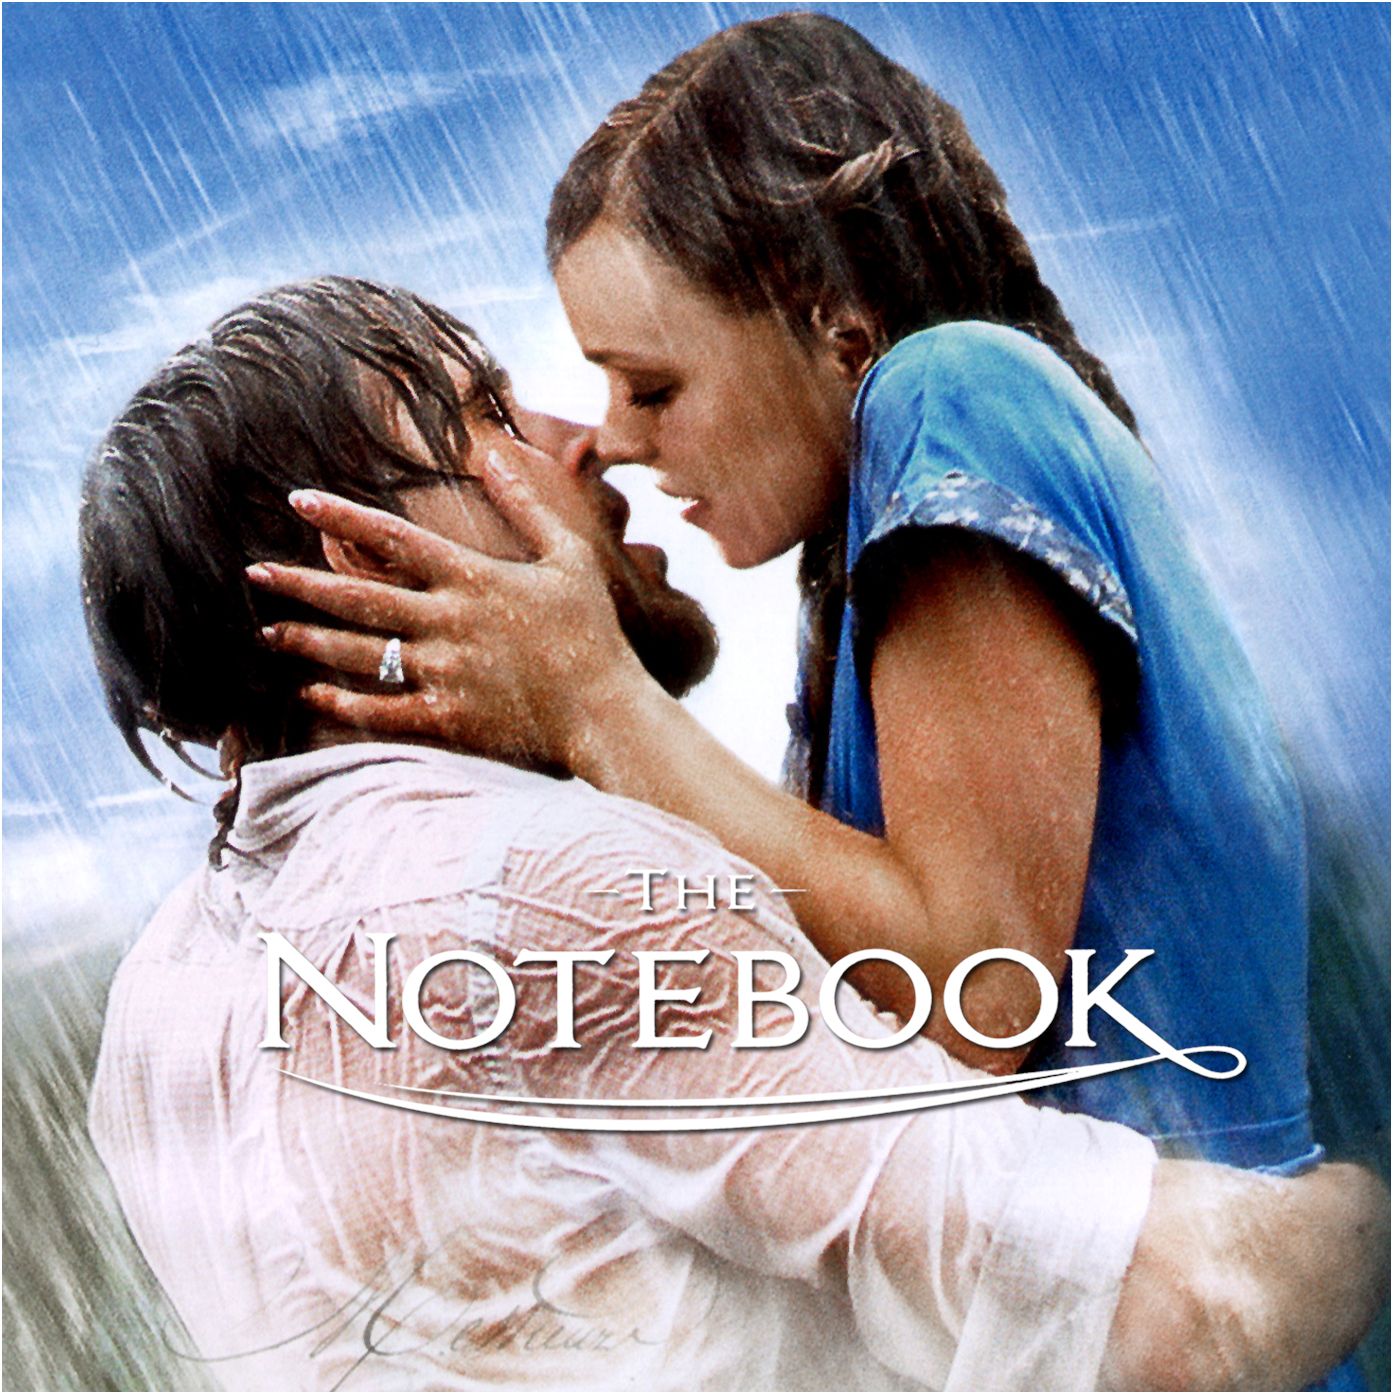 the notebook book cover